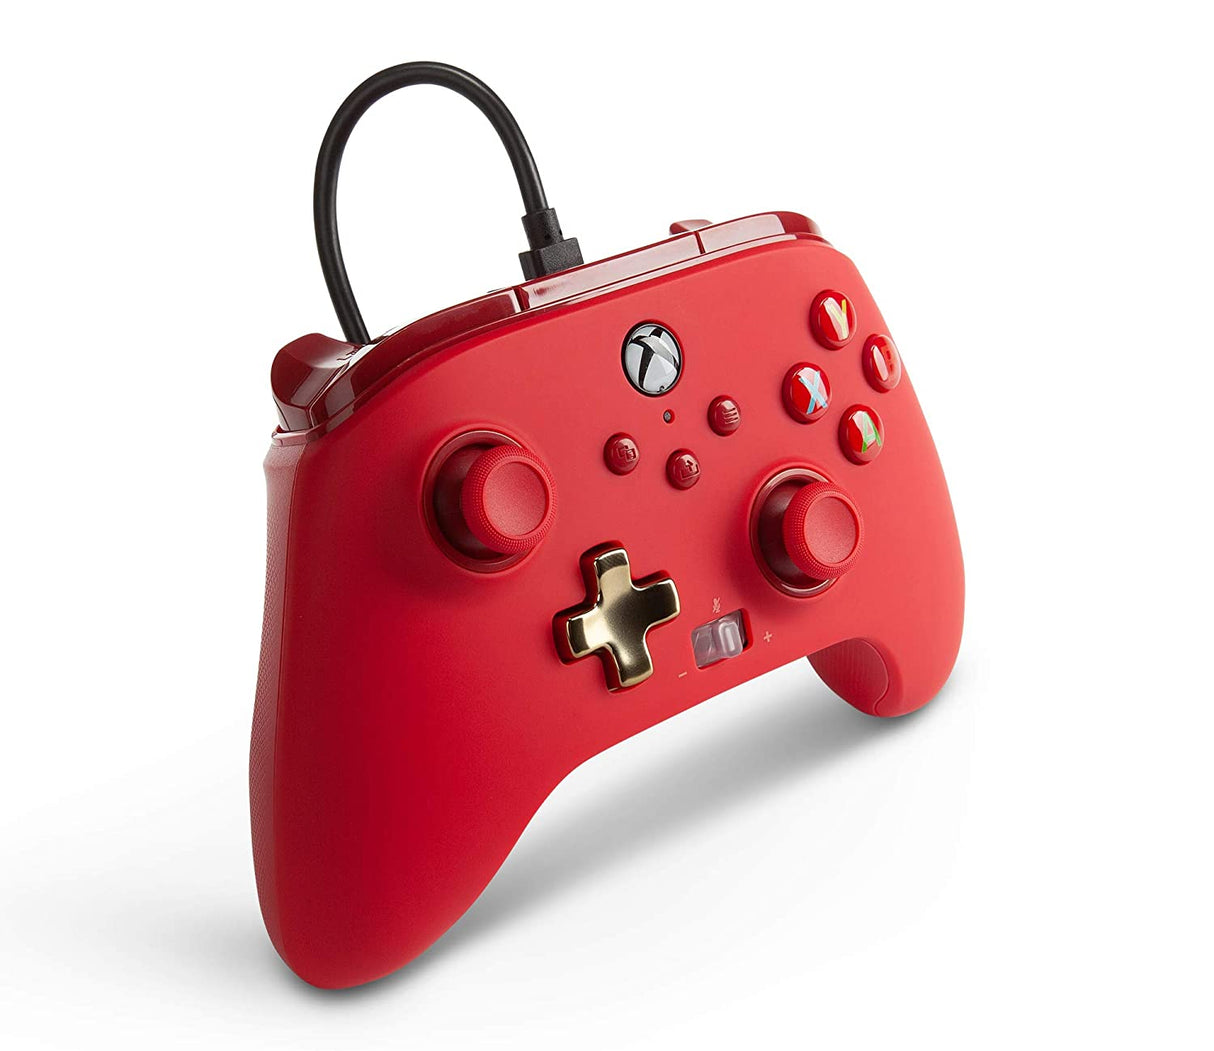 PowerA Enhanced Wired Controller for Xbox - Red, Gamepad, Wired Video Game Controller, Gaming Controller, Xbox Series X|S, Xbox One - Xbox Series X